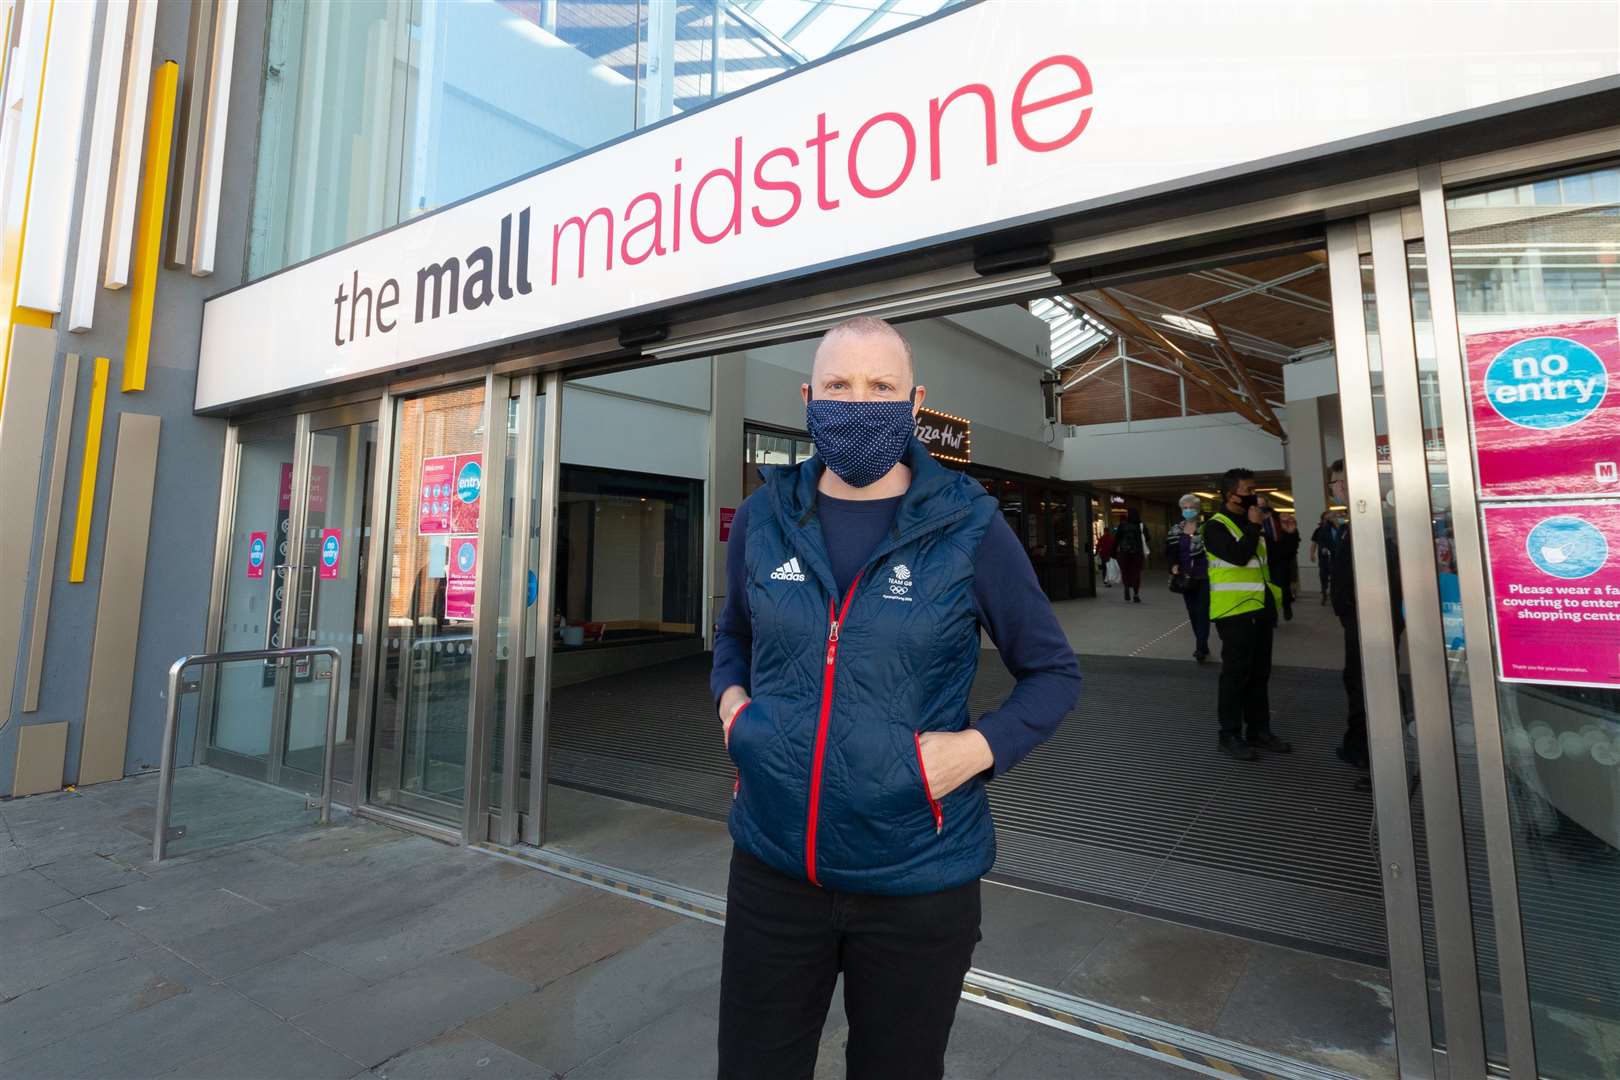 MP Tracey Crouch praised the Mall Shopping Centre for its Covid-19 secure measures